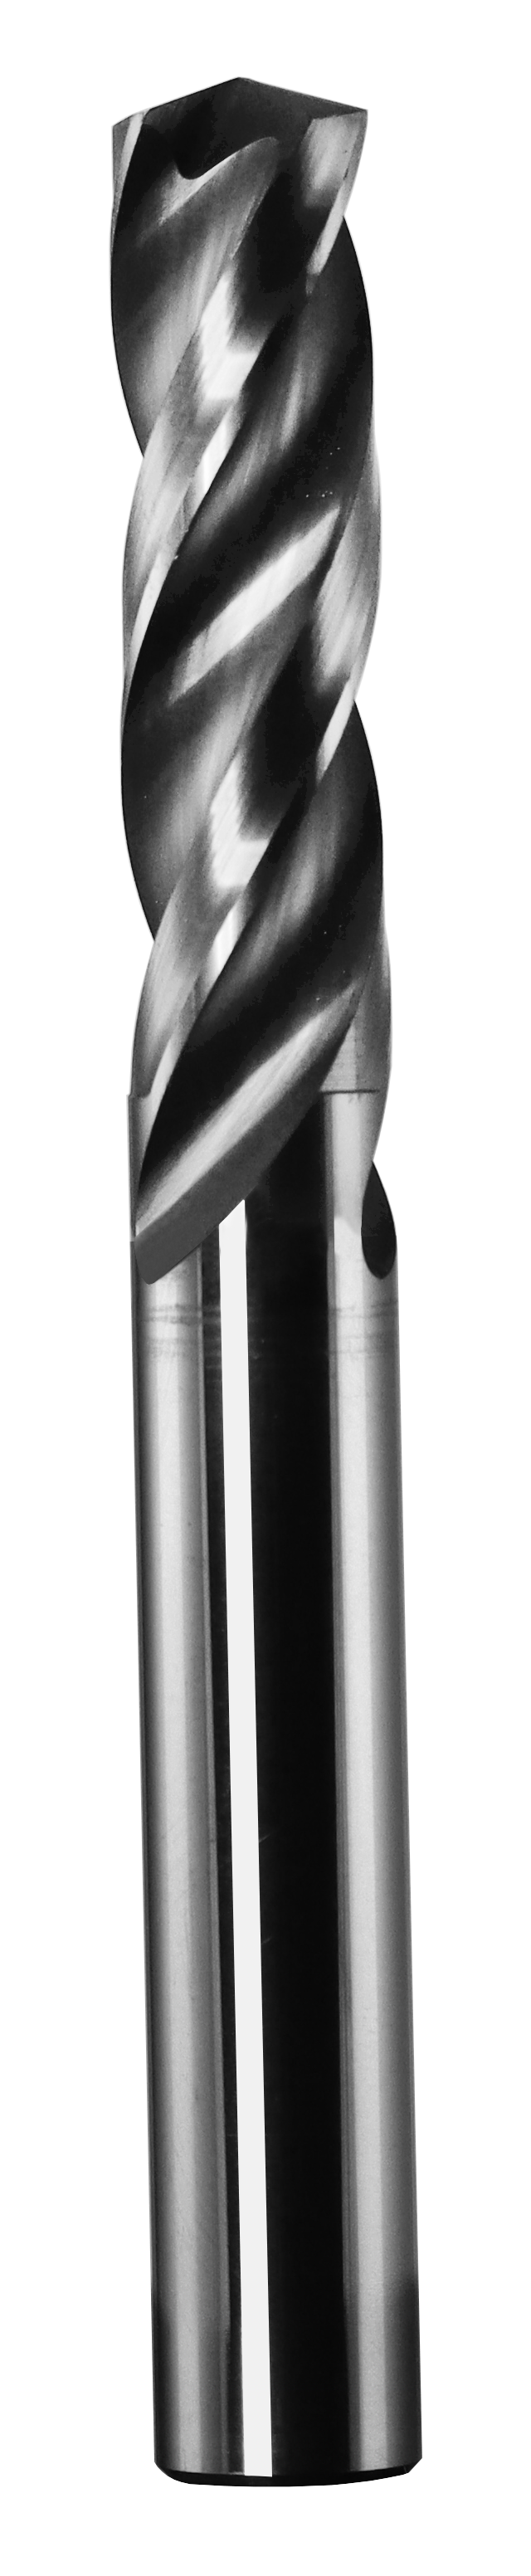 5.20mm Dia, 150 Degree Point, Solid Carbide Drill - 63008